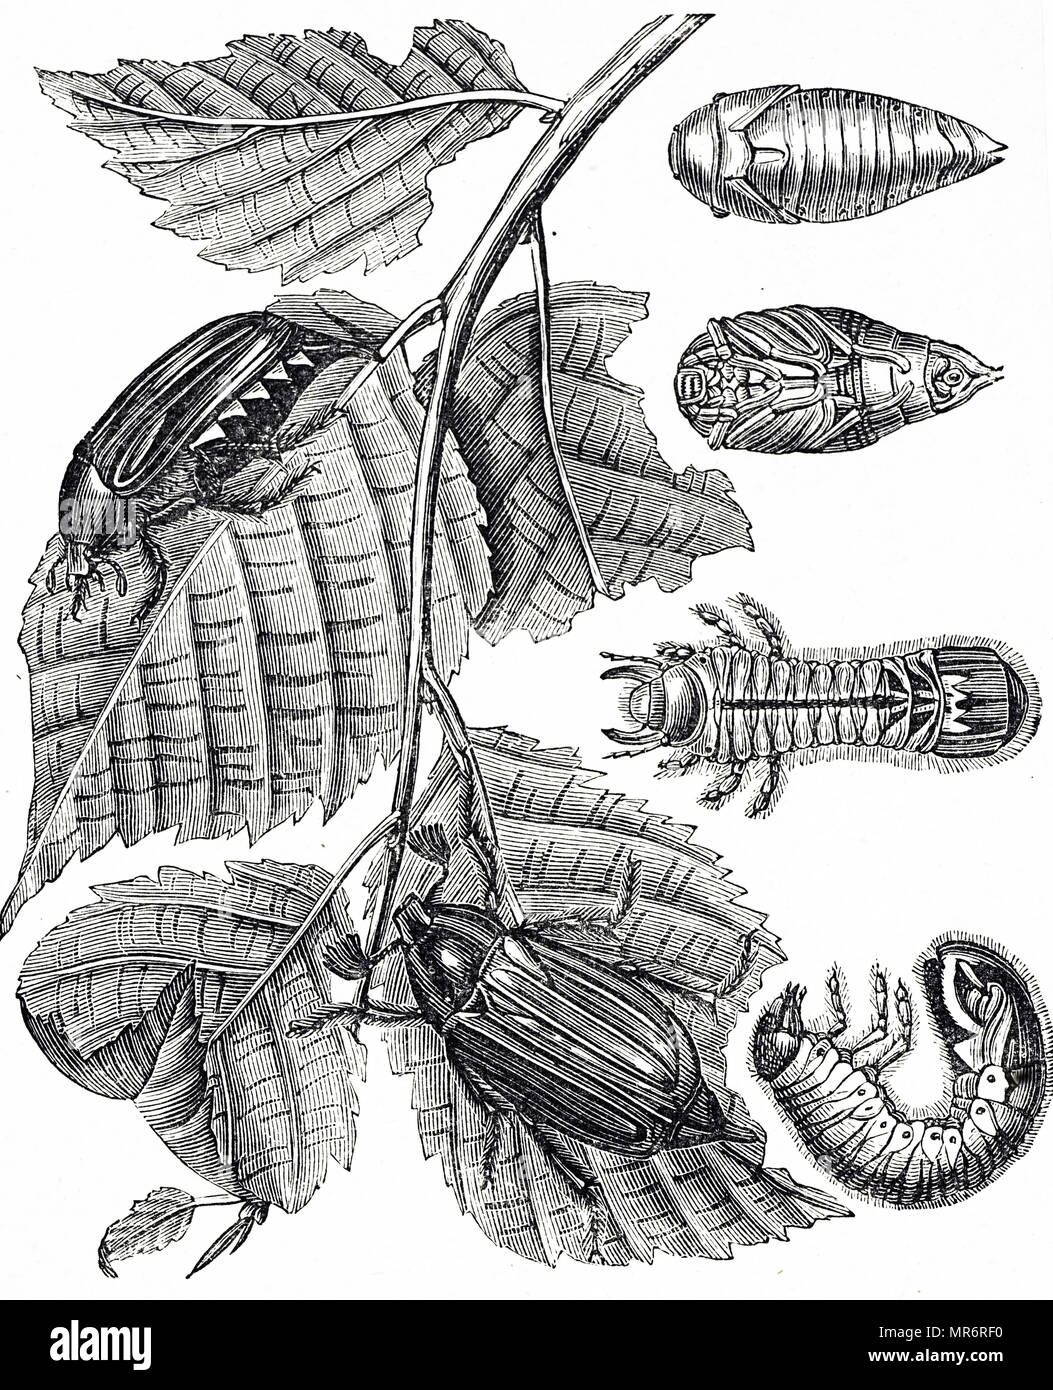 Engraving depicting the life cycle of a cockchafer, colloquially called May bug or doodlebug, is a European beetle of the genus Melolontha, in the family Scarabaeidae. Dated 19th century Stock Photo